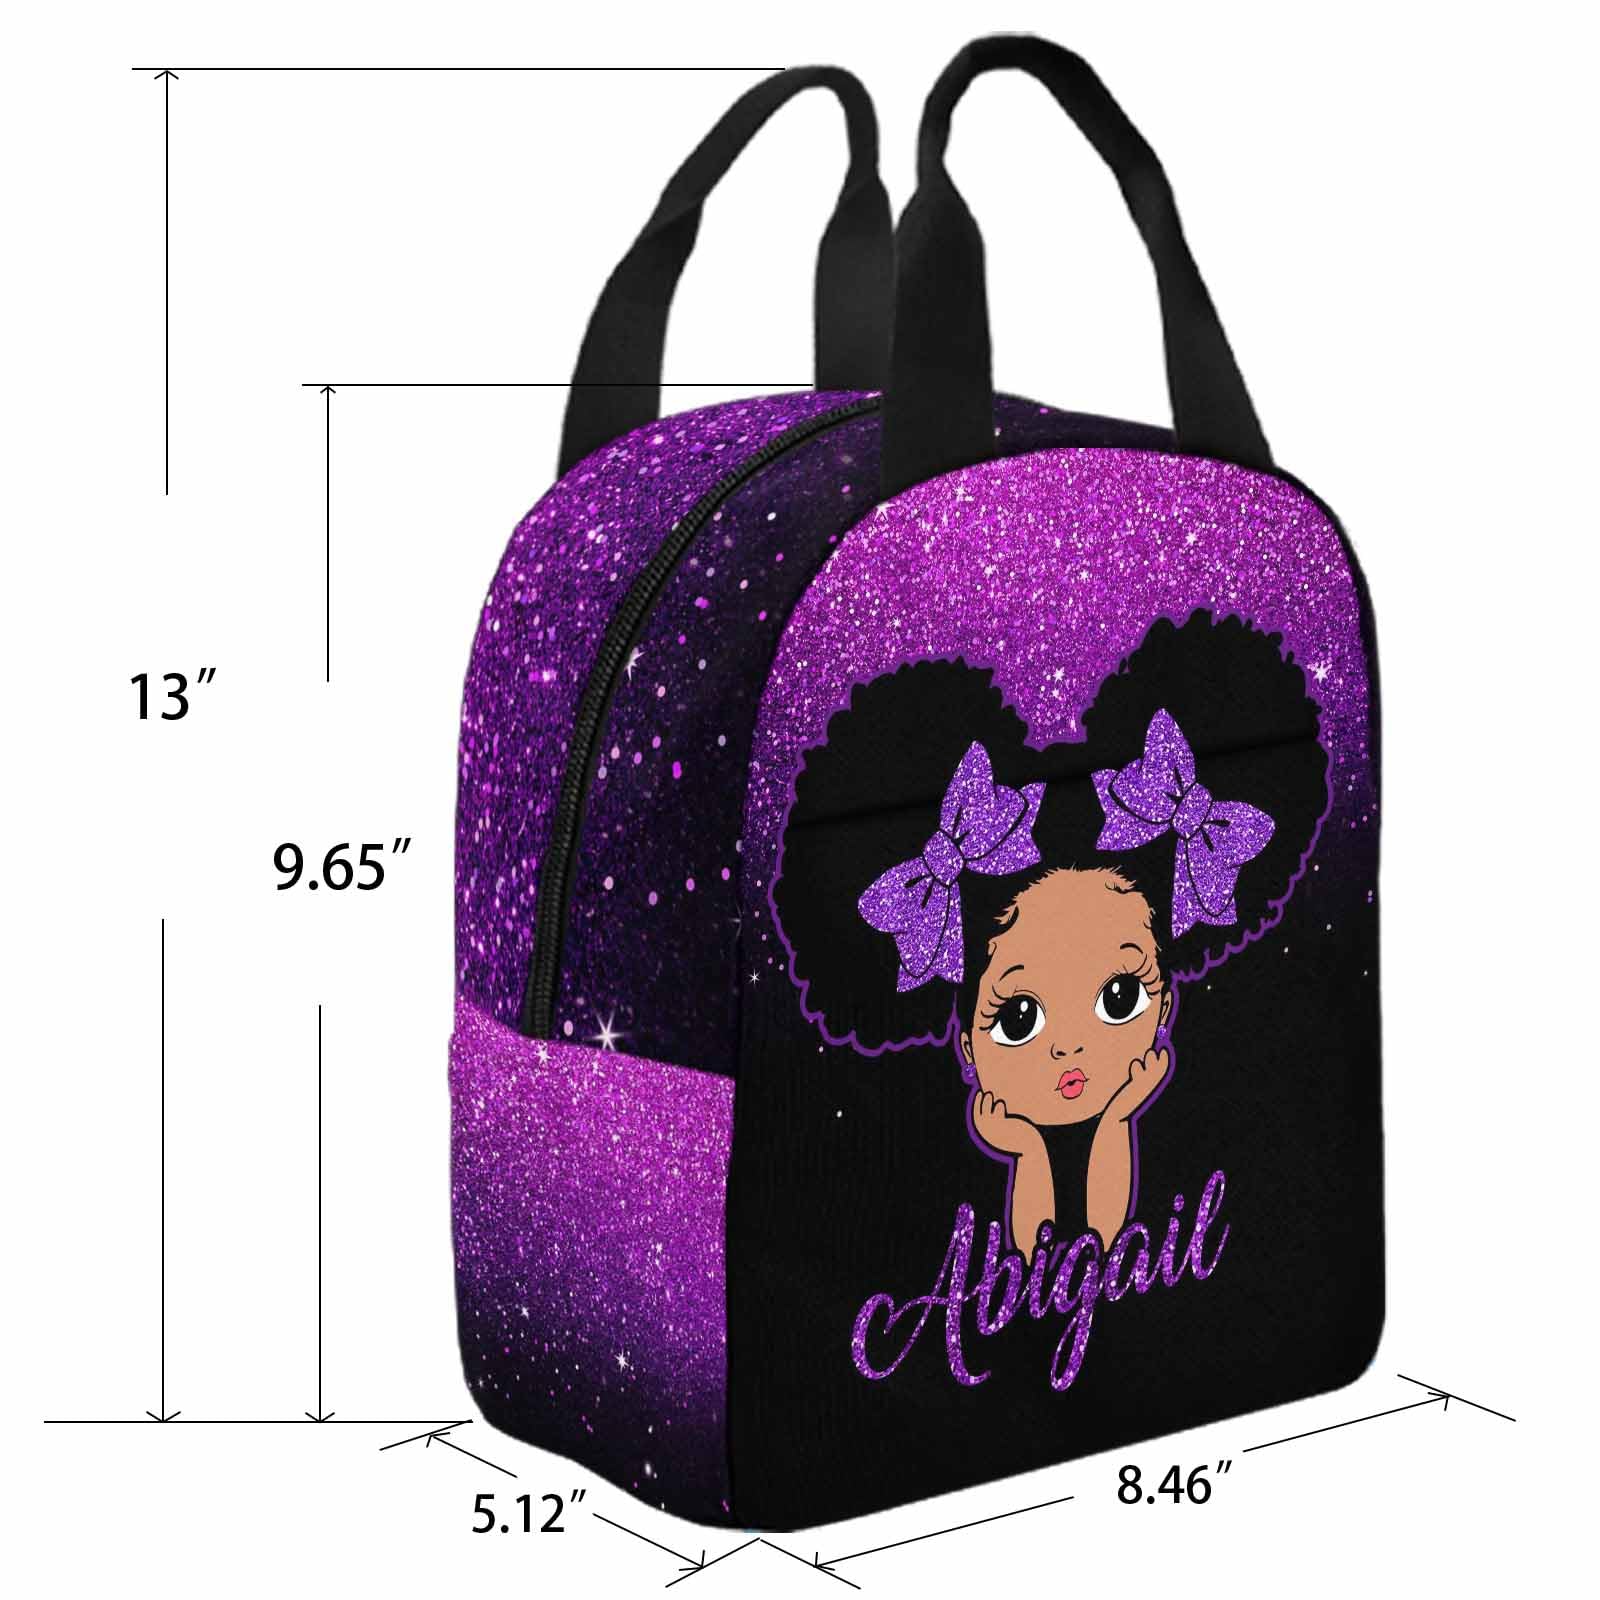 InterestPrint Personalized Schoolbag Set for Daughter from Mom, Custom Purple Glitter Shoulders Bag Customized Name Backpack Lunchbox Set Casual Daypack for Teenagers